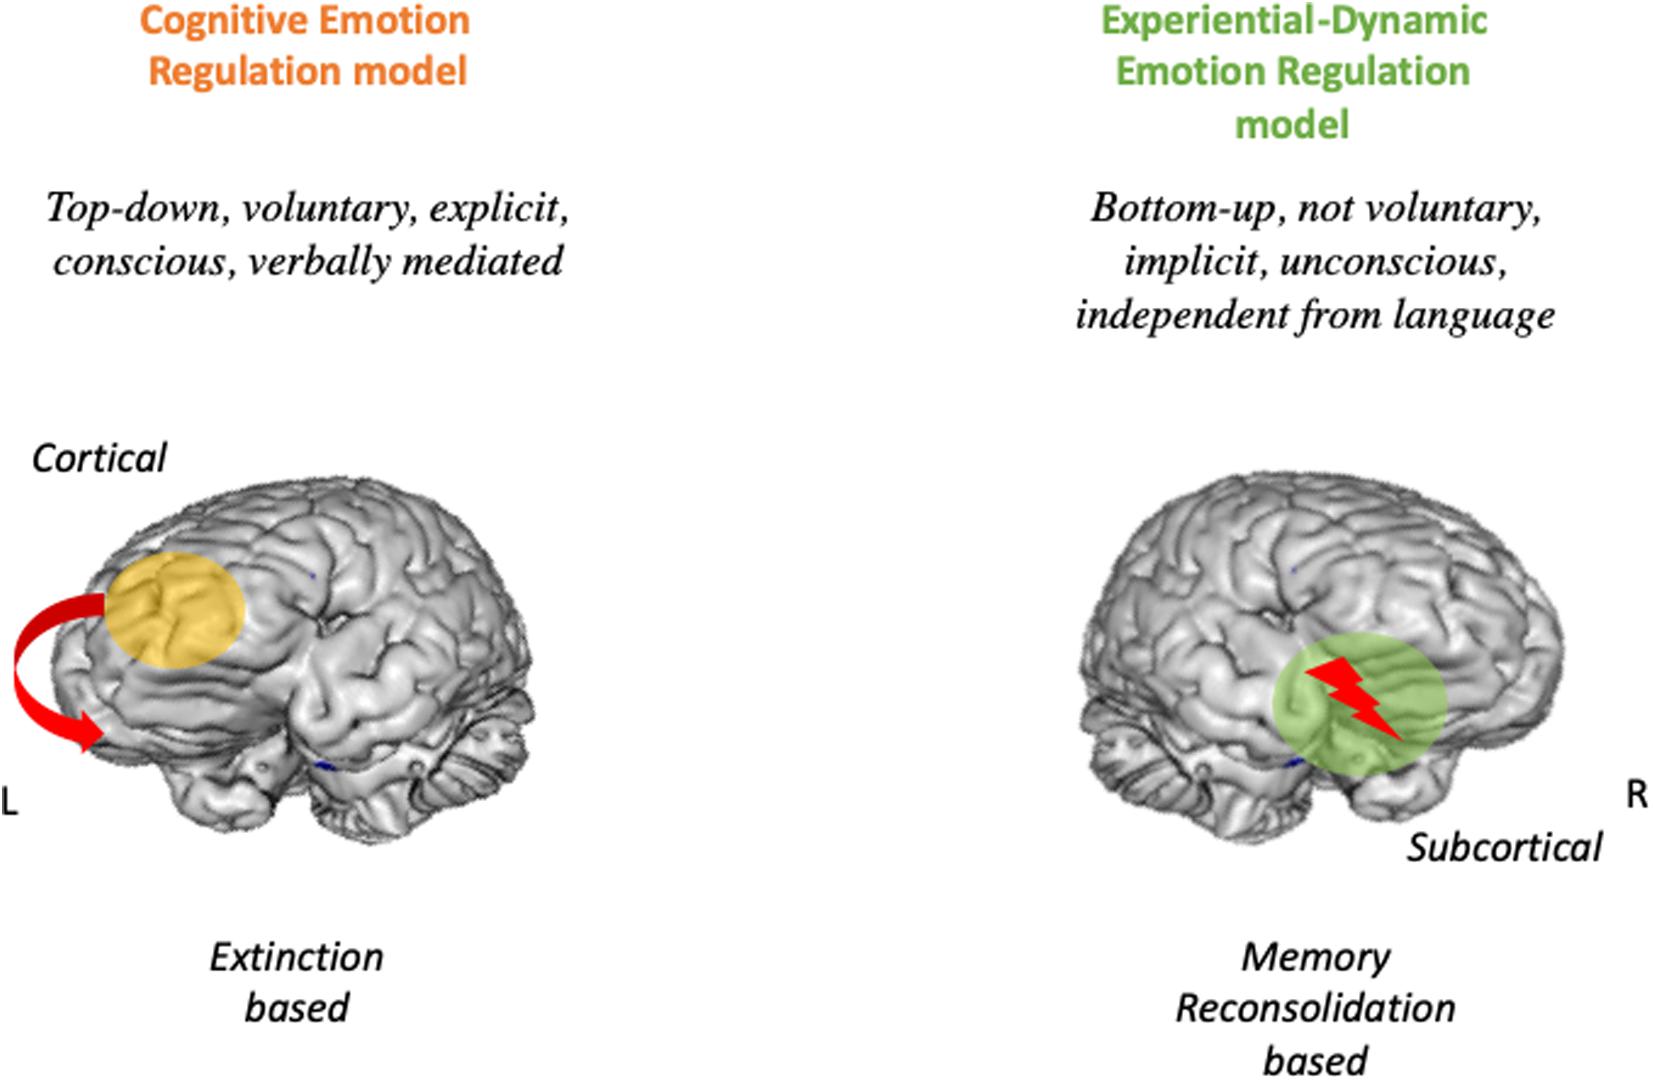 | A Dual Route Model for Regulating Emotions: Comparing Models, and Mechanisms